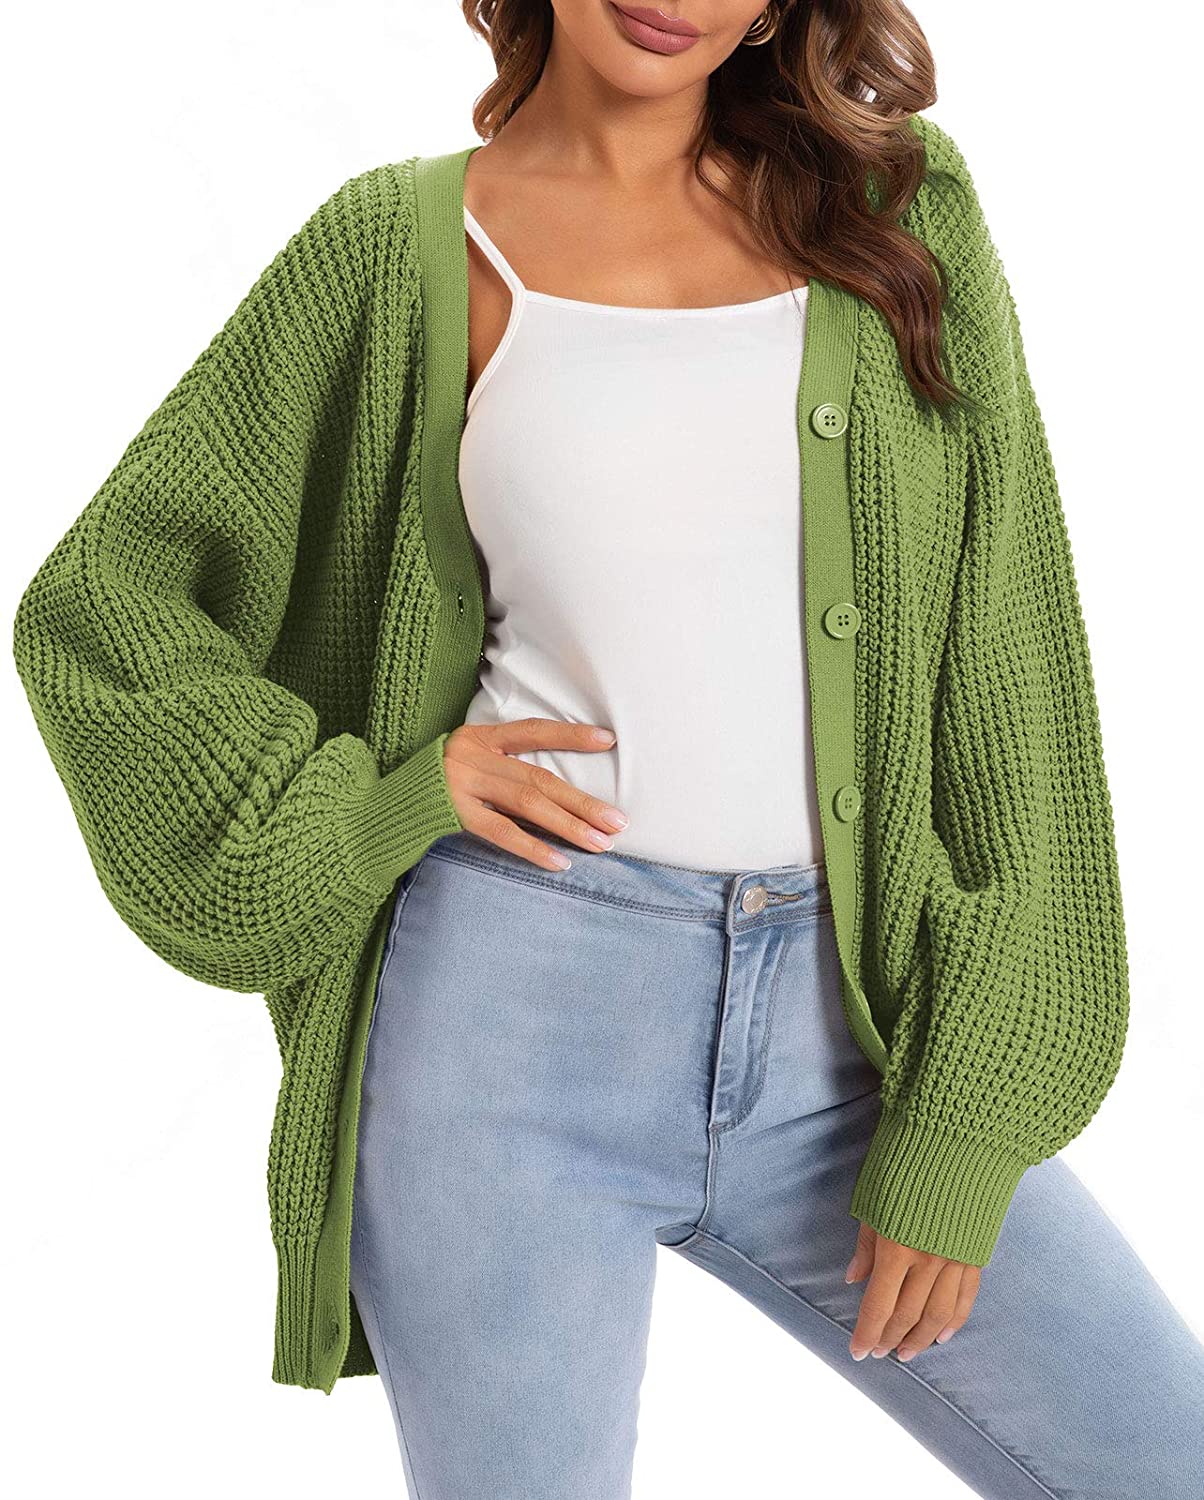 QUALFORT Women's Cardigan Sweater 100% Cotton Button-Down Long Sleeve  Oversized